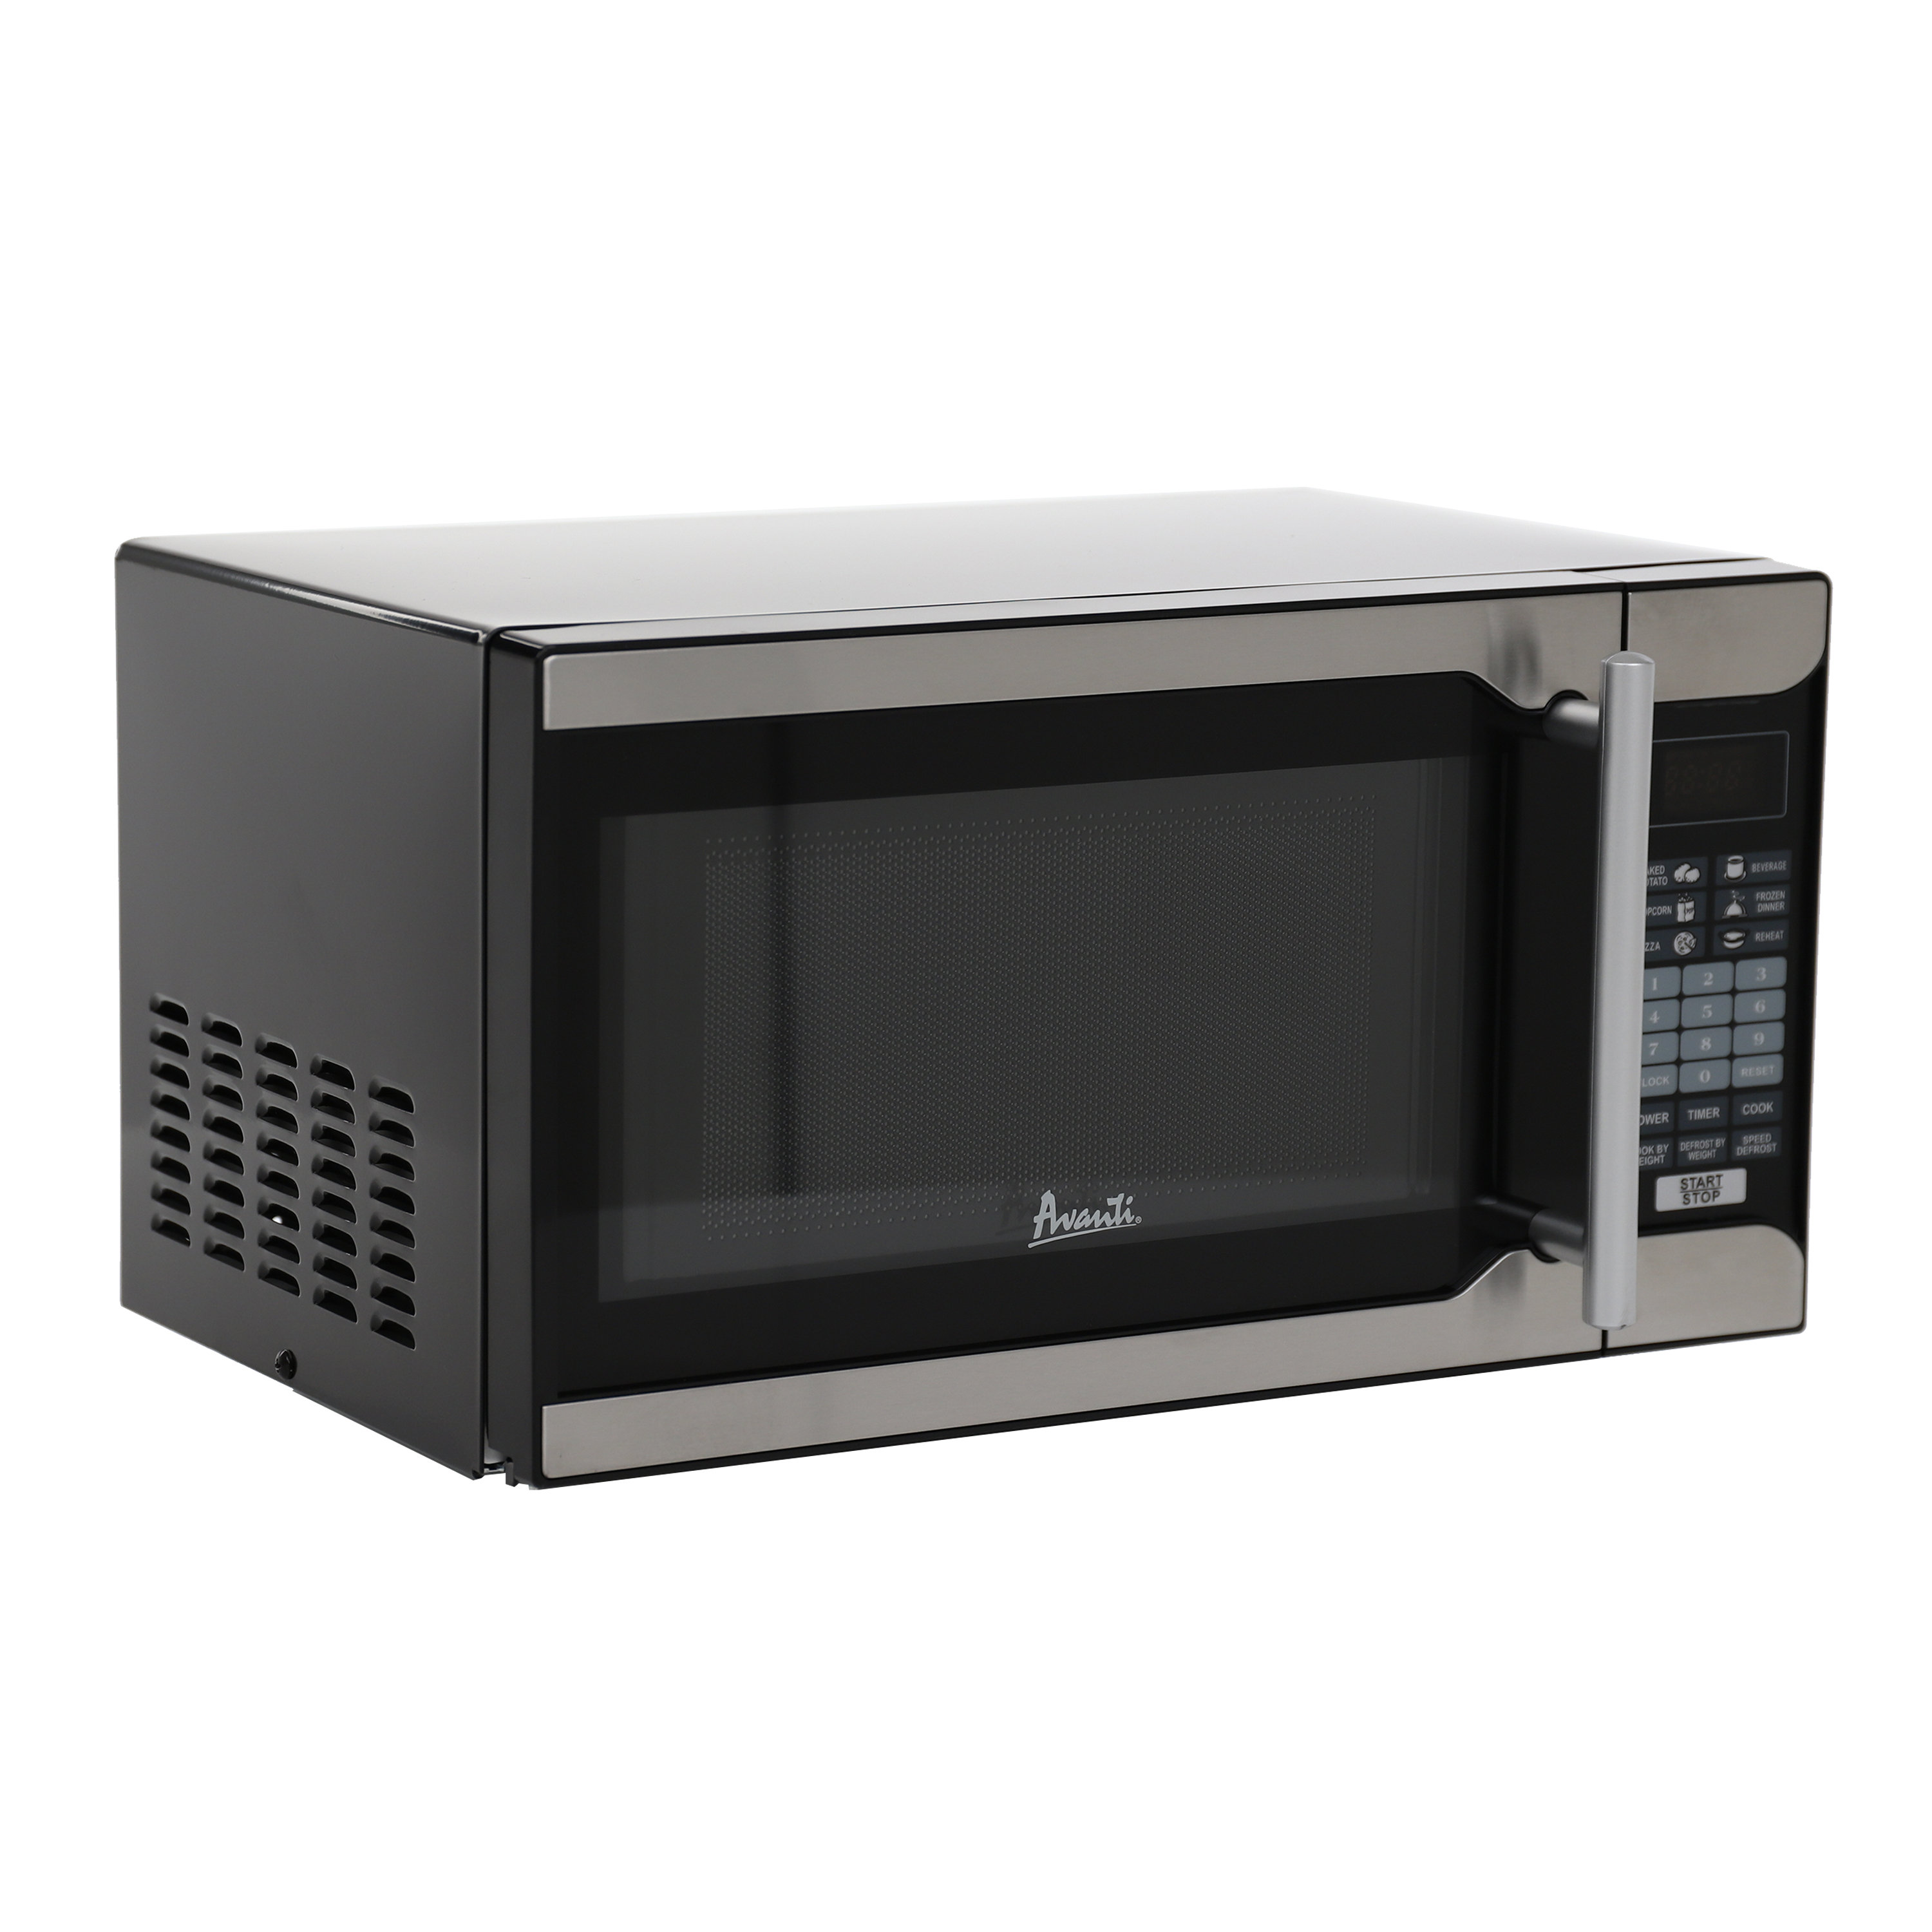  GE Countertop Microwave Oven, 0.7 Cubic Feet Capacity, 700  Watts, Kitchen Essentials for the Countertop or Dorm Room